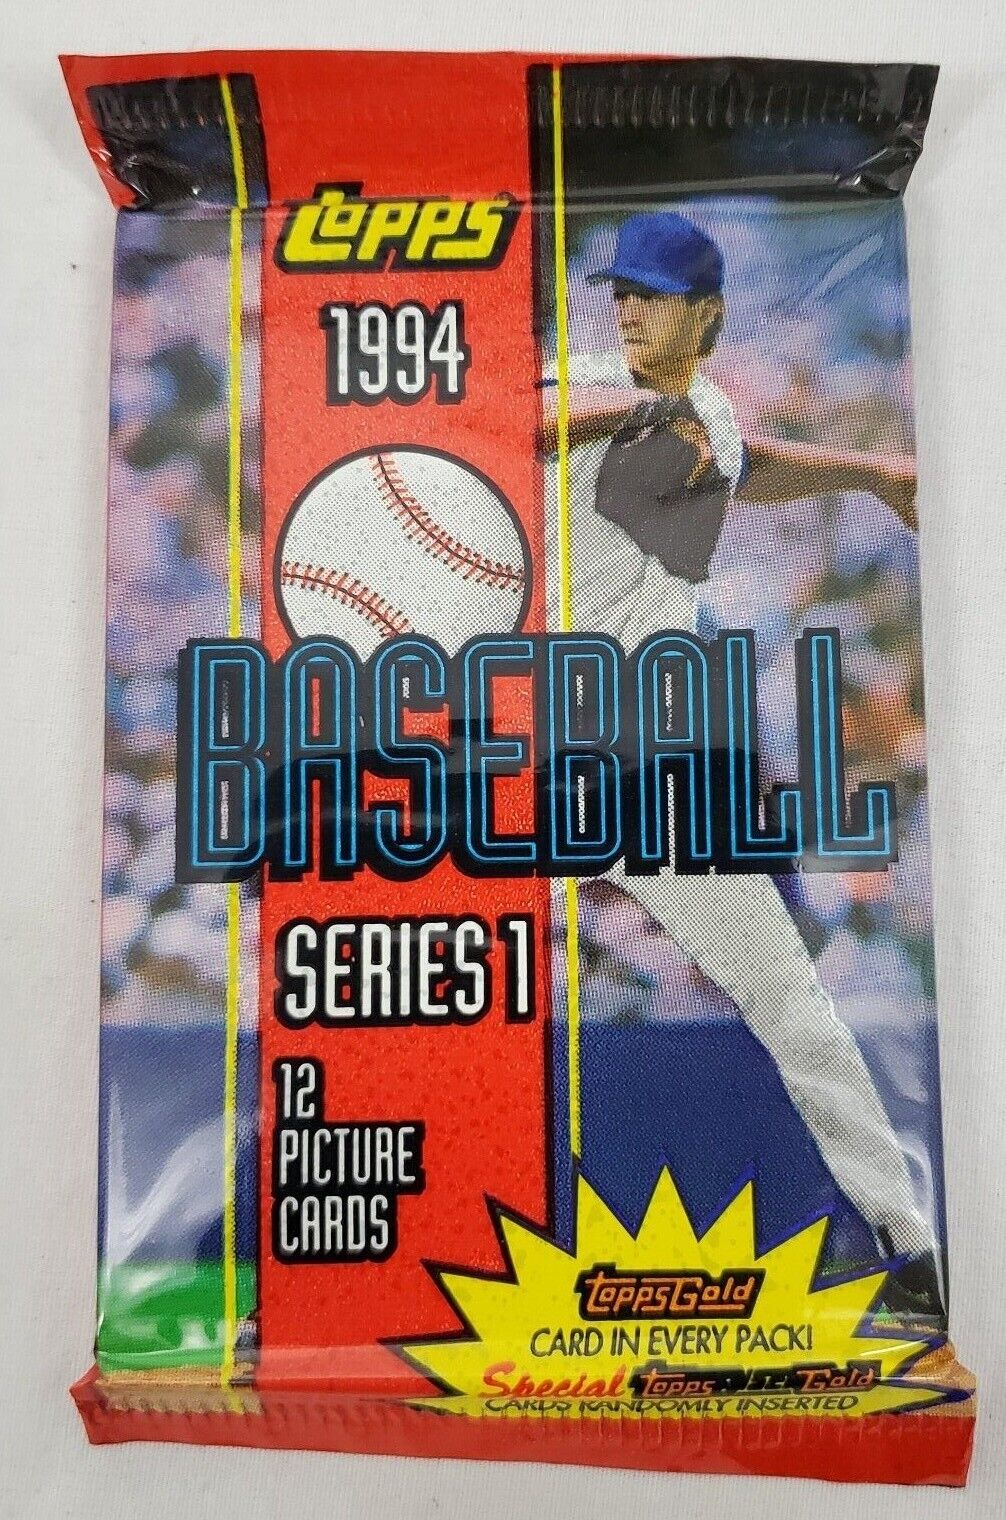 Topps ~ 1994 Series 1 - Baseball Cards Pack 12 Cards - Unopened - 007